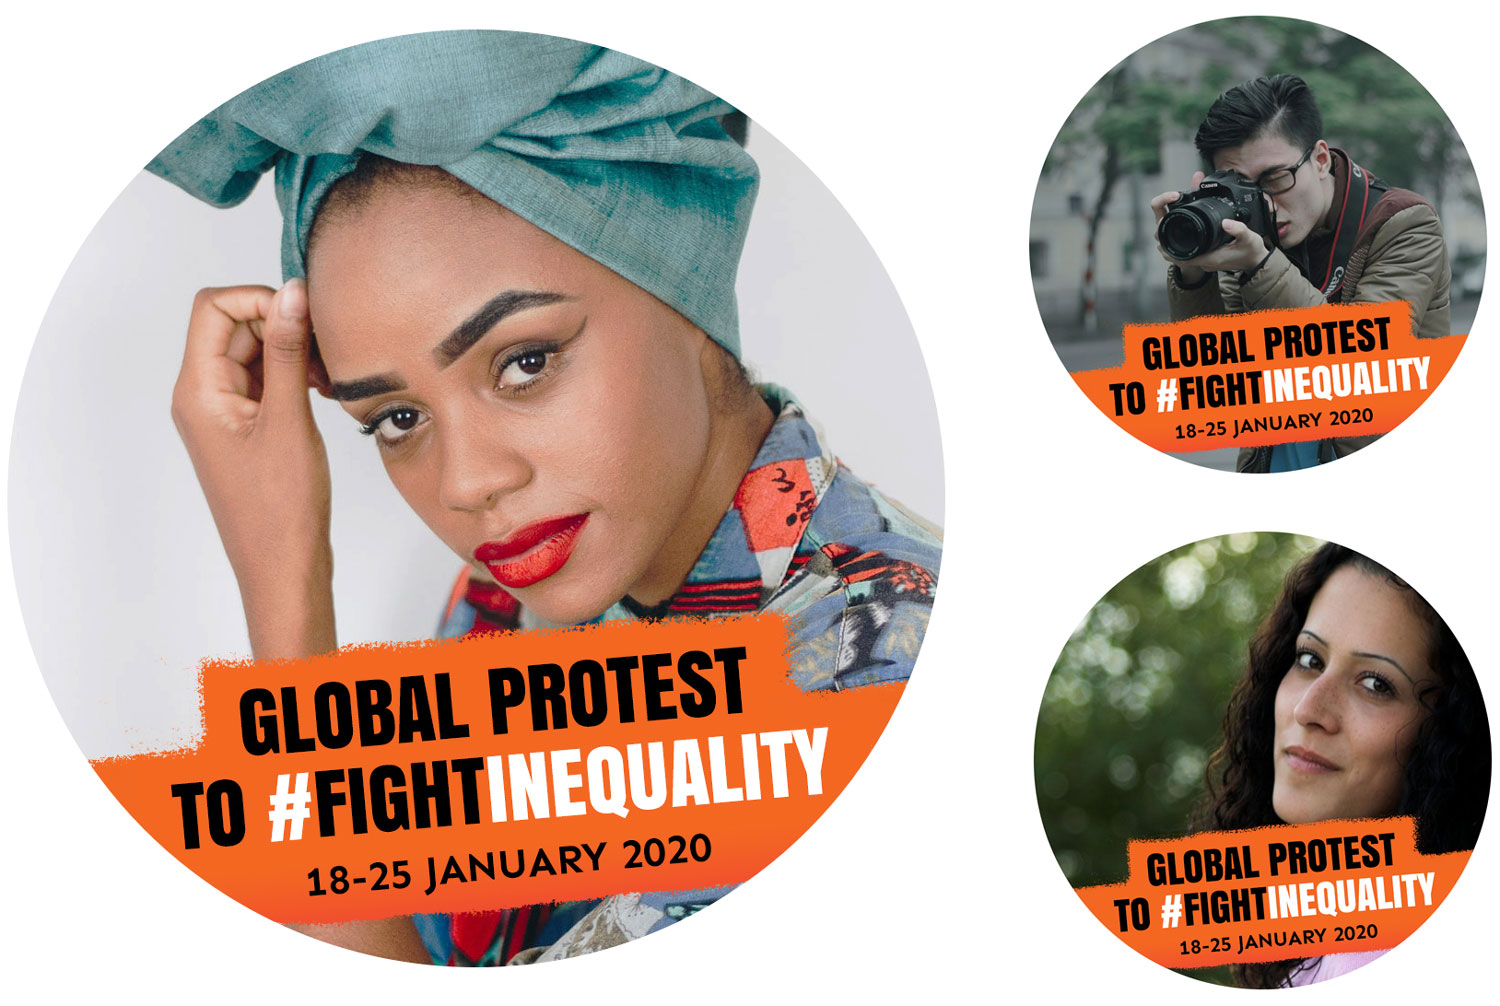 Global Protest to Fight Inequality